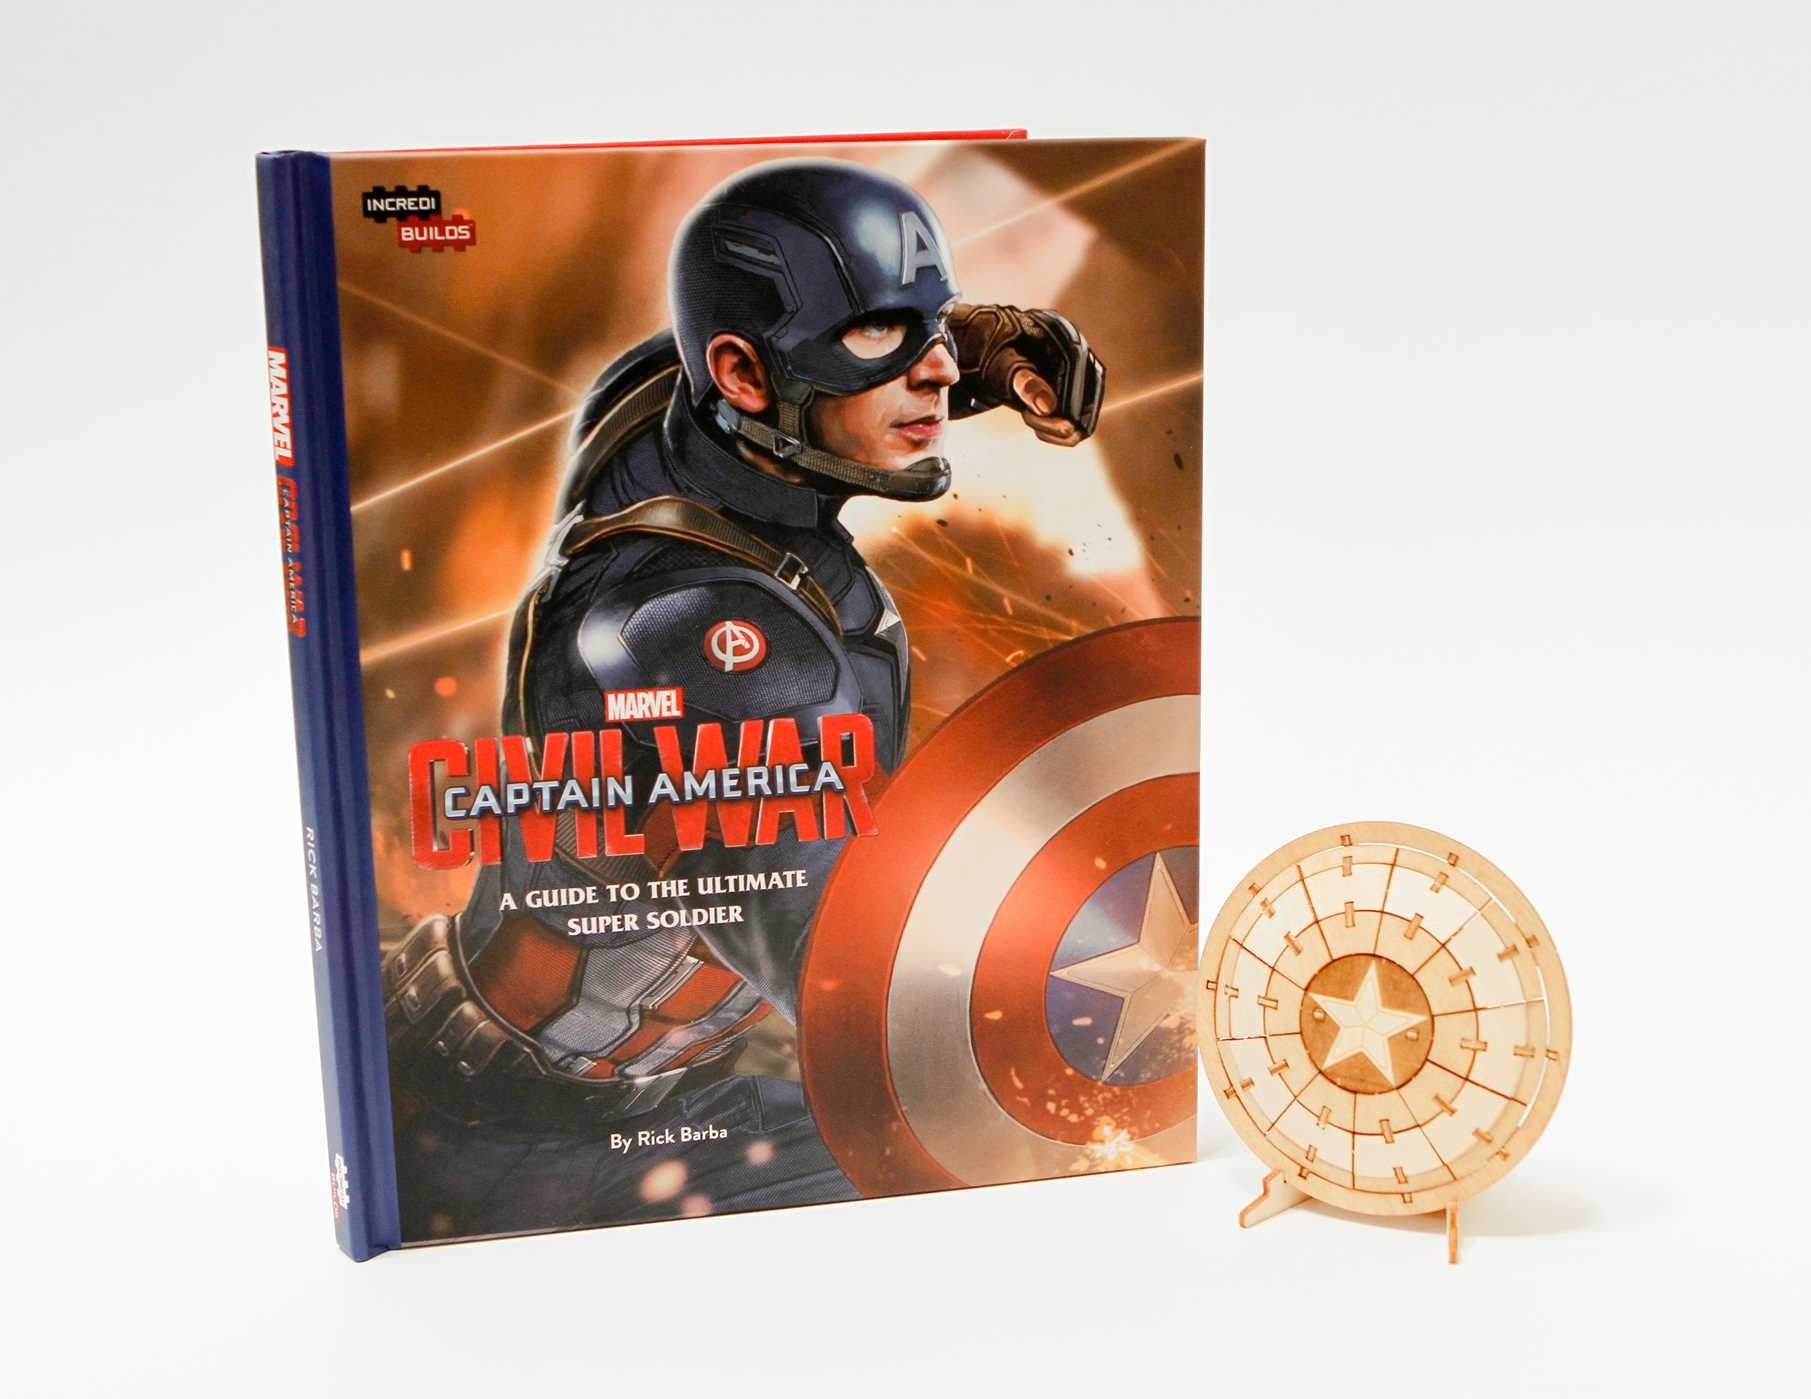 IncrediBuilds - Marvel\'s Captain America: Civil War Deluxe Book and Model Set: A Guide to the Ultimate Super Soldier | Rick Barba